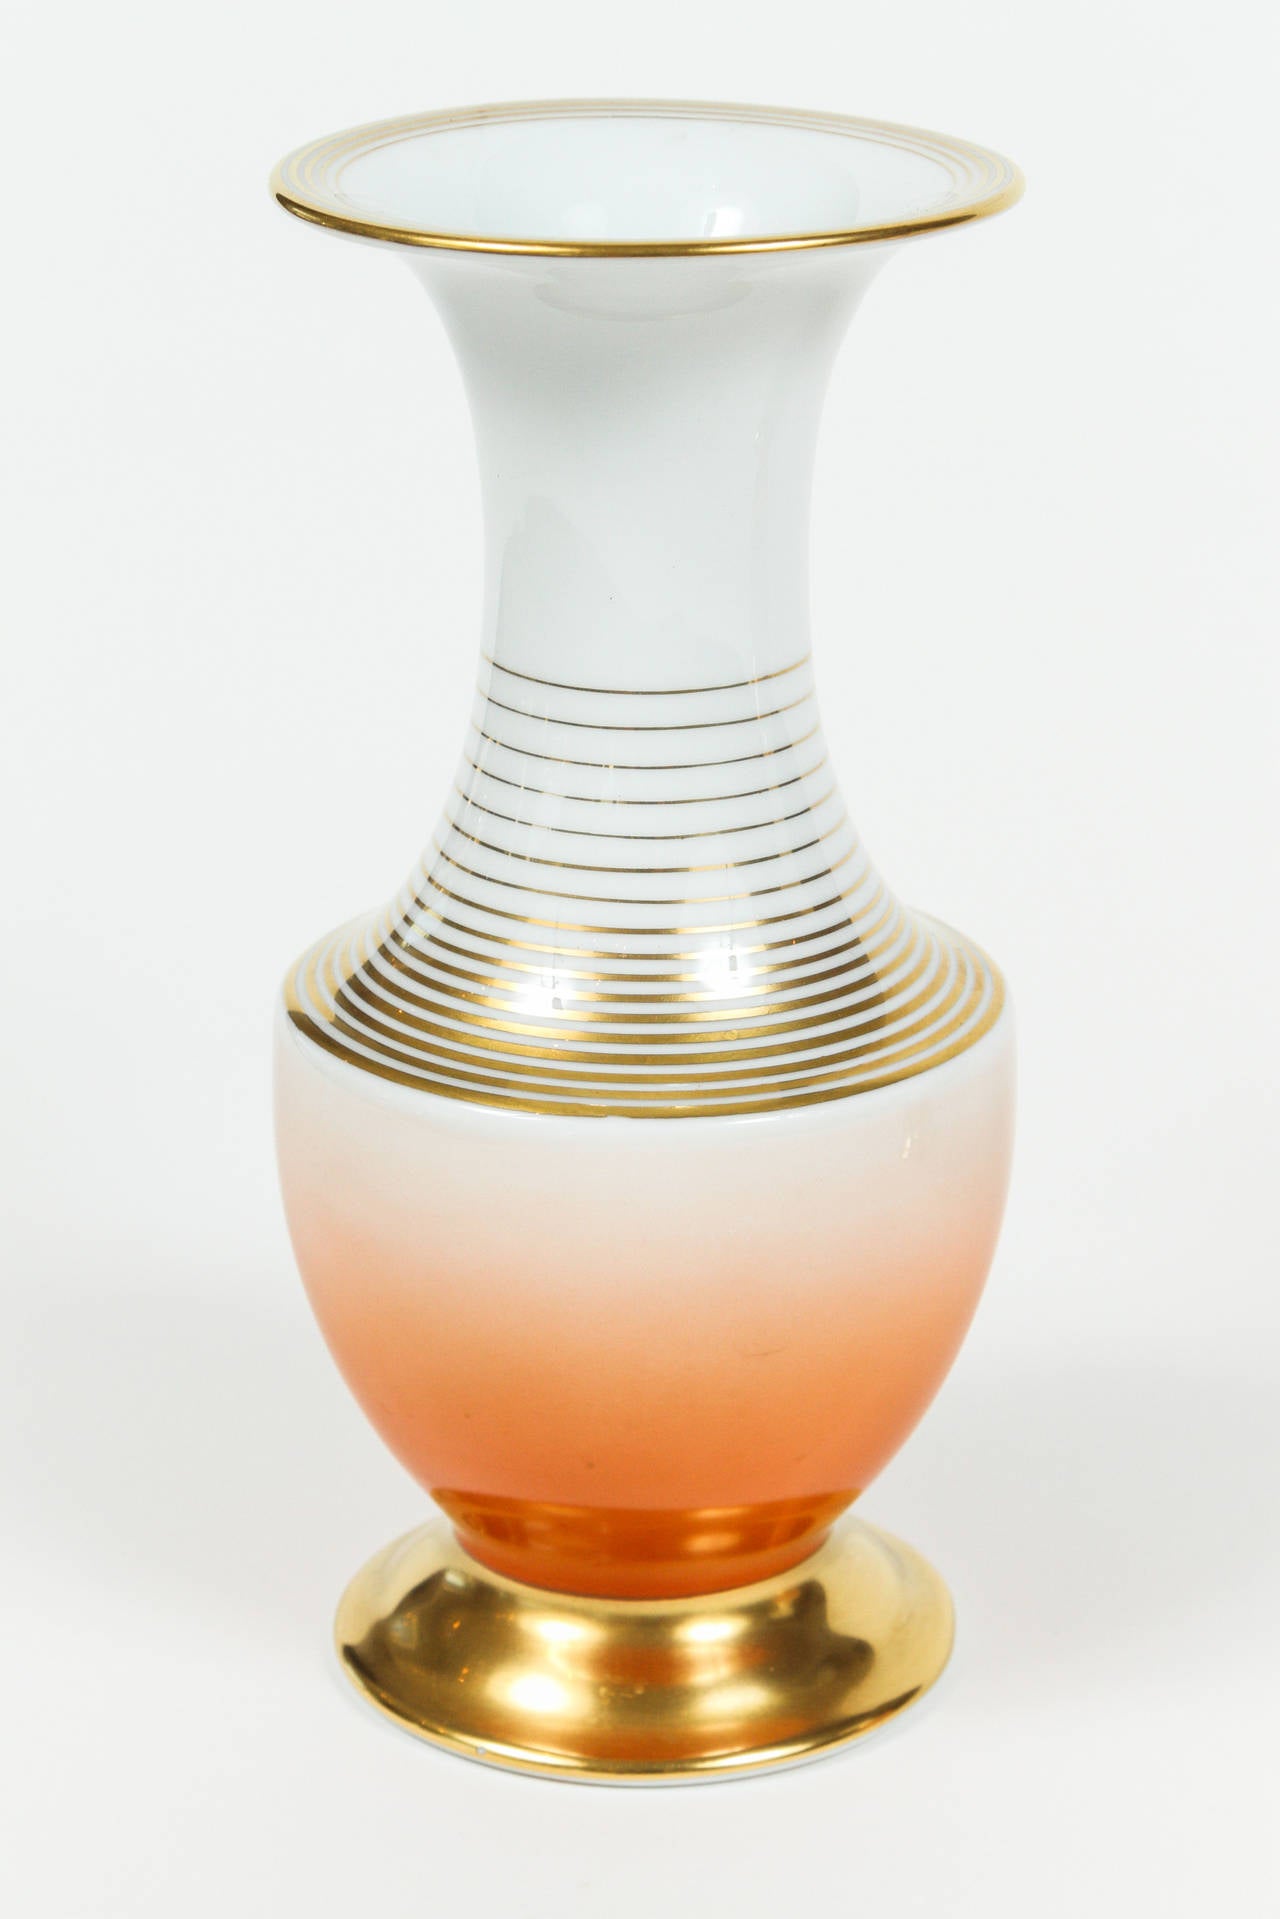 Pair of white porcelain vases by Rosenthal with painted gold rings around the top, neck and bases. Orange ombre on the bottom sections makes the vases very interesting. Printed on the underside(s): 